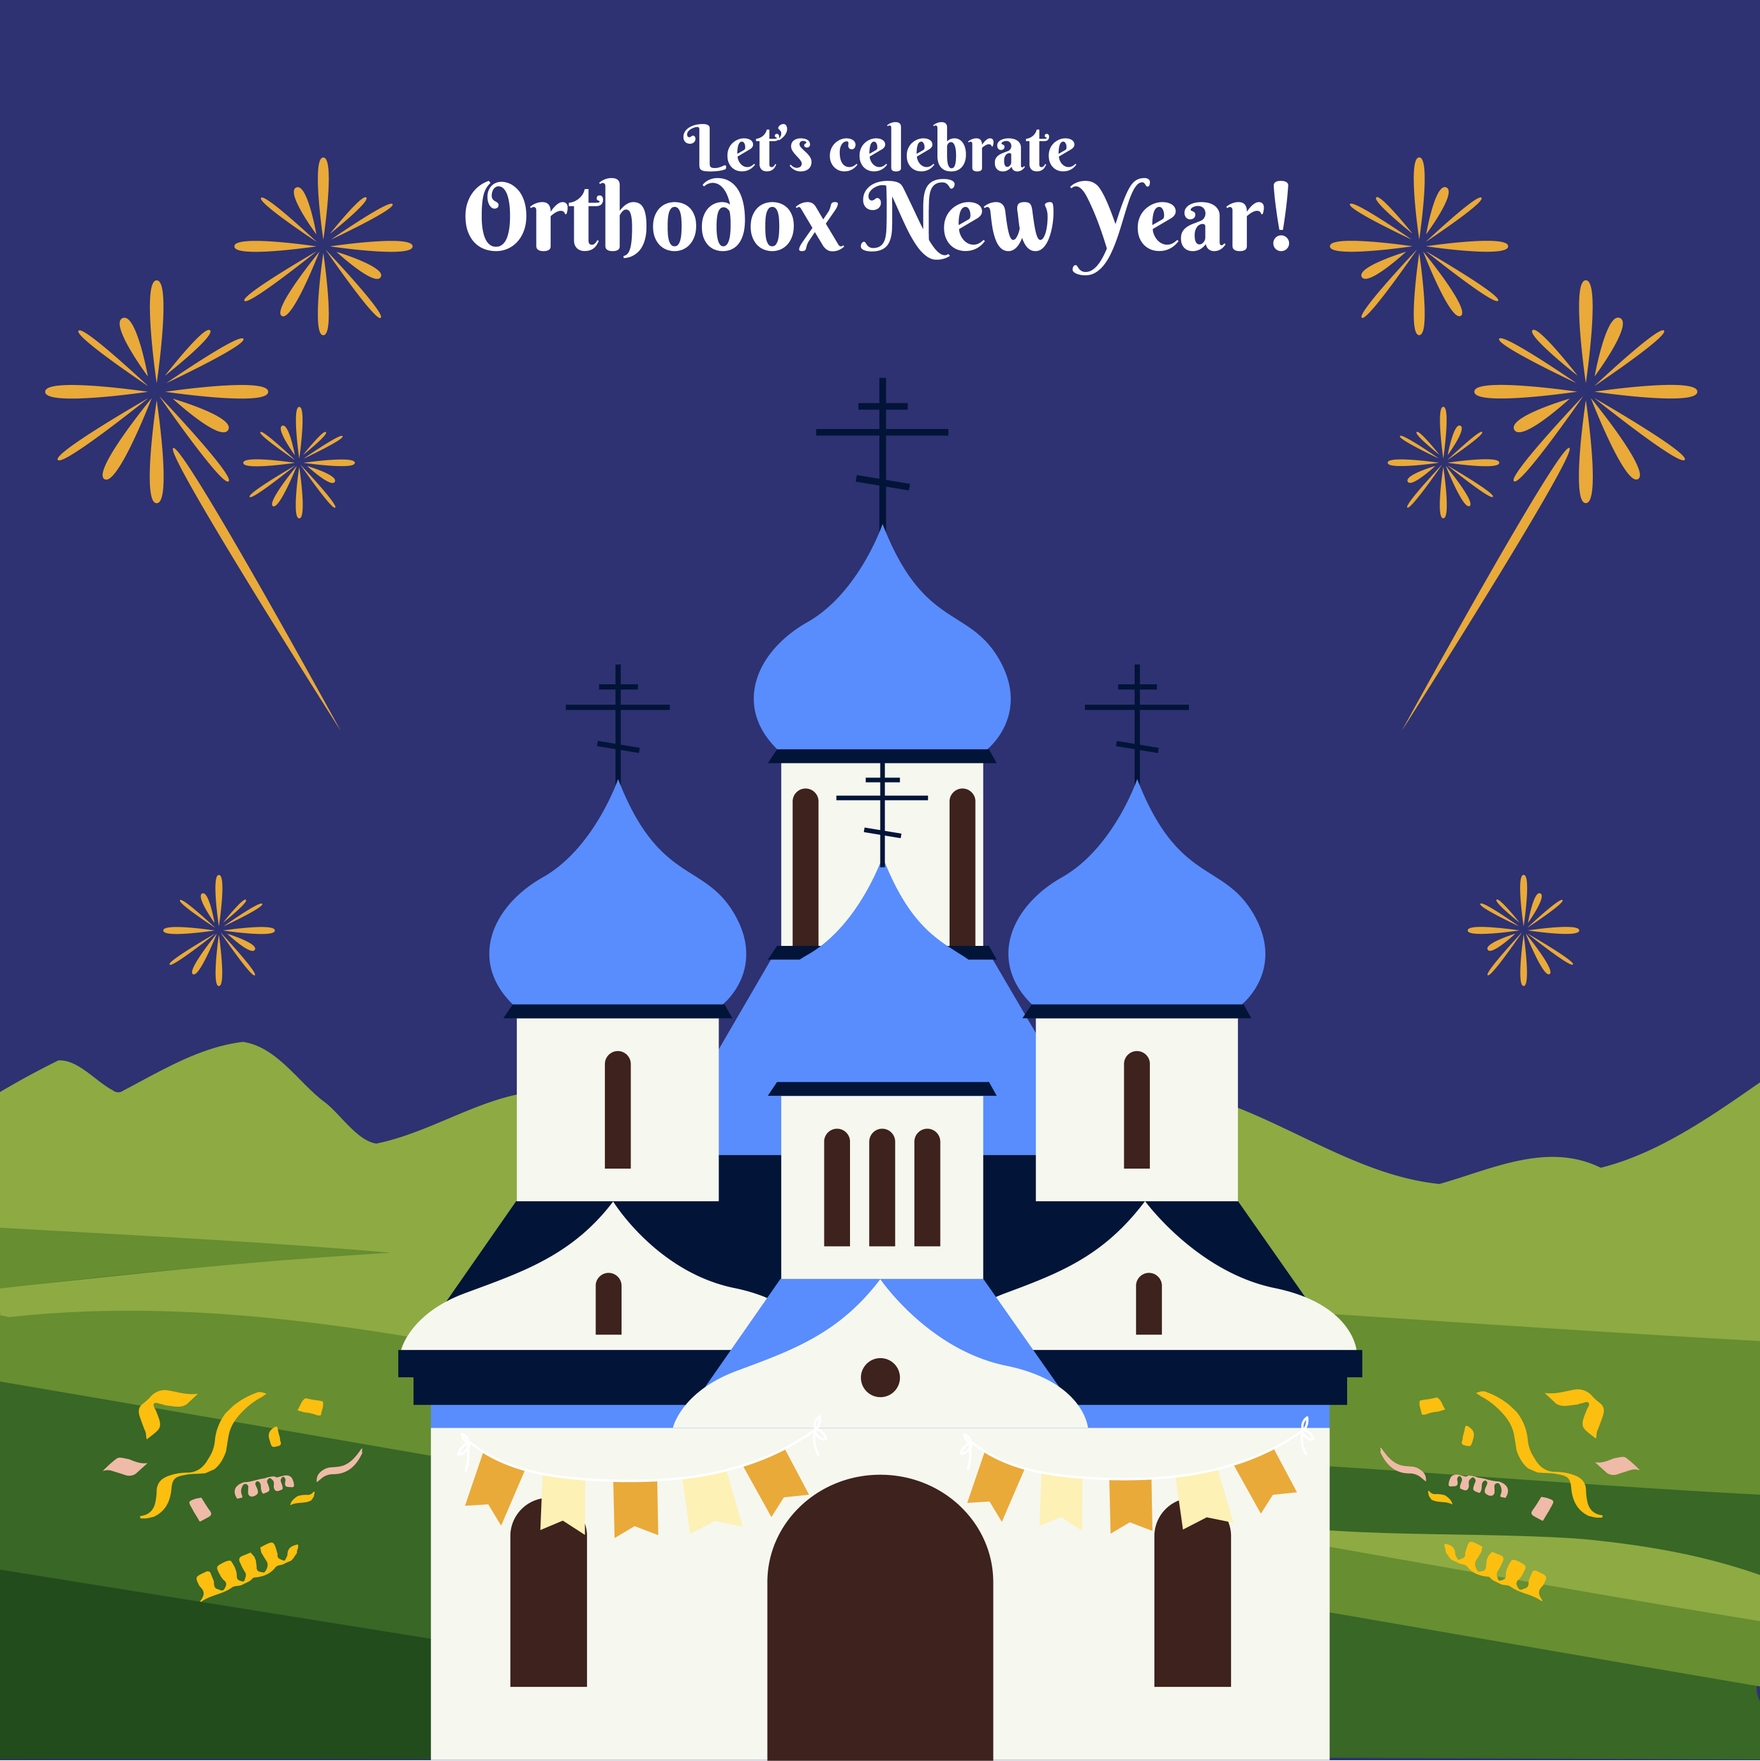 Free Orthodox New Year Vector in Illustrator, PSD, EPS, SVG, JPG, PNG